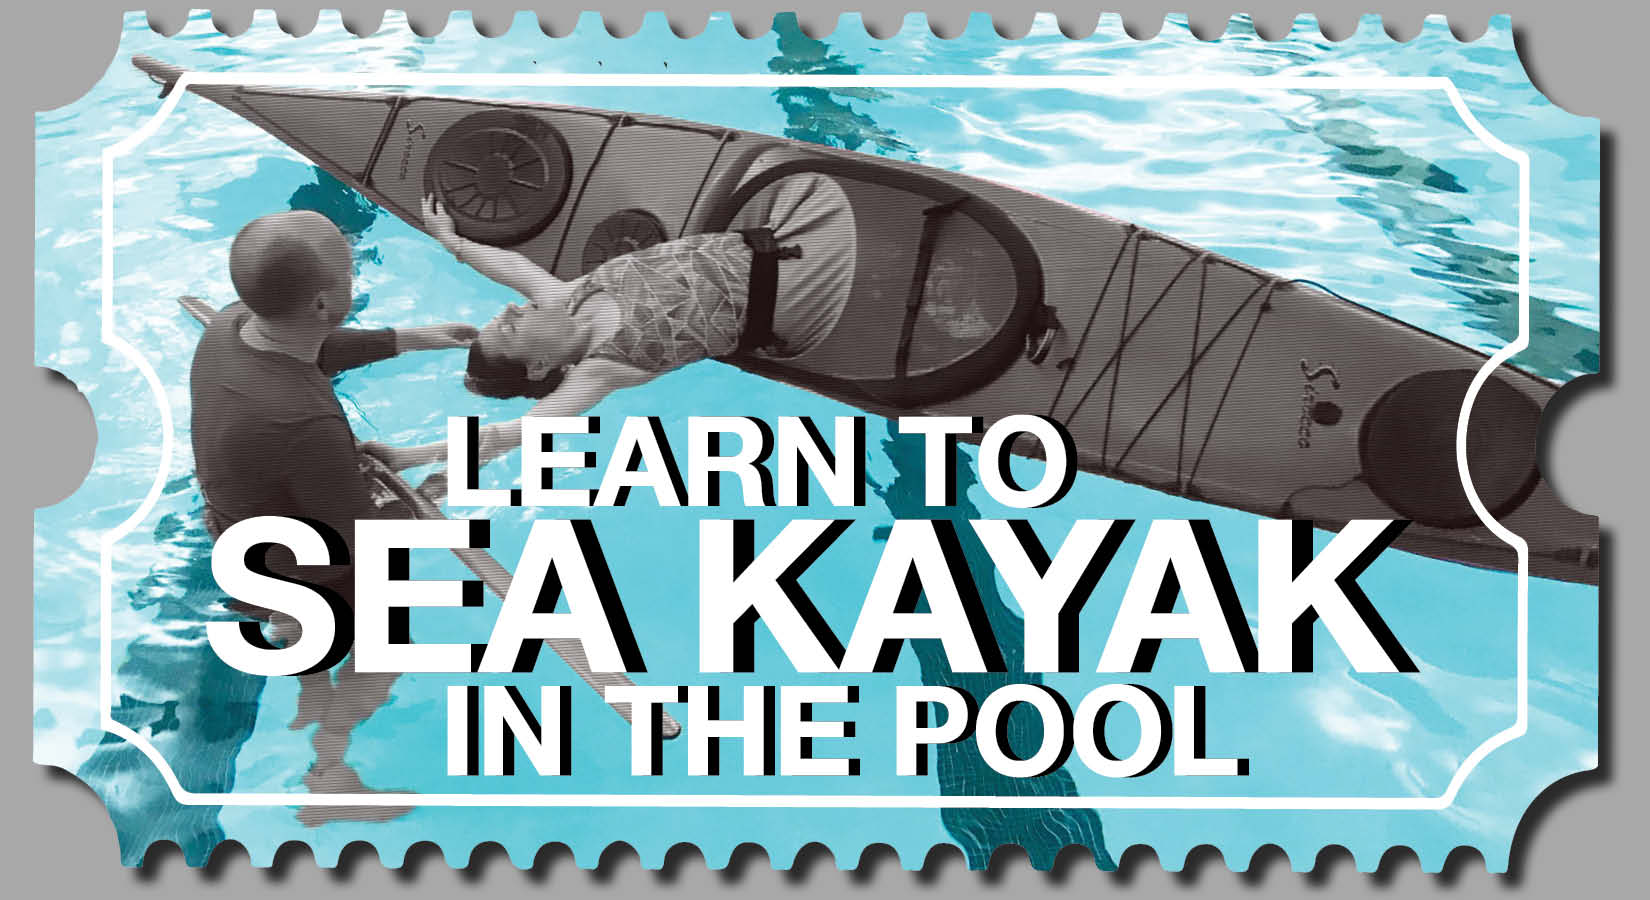 LEARN TO SEA KAYAK IN THE POOL